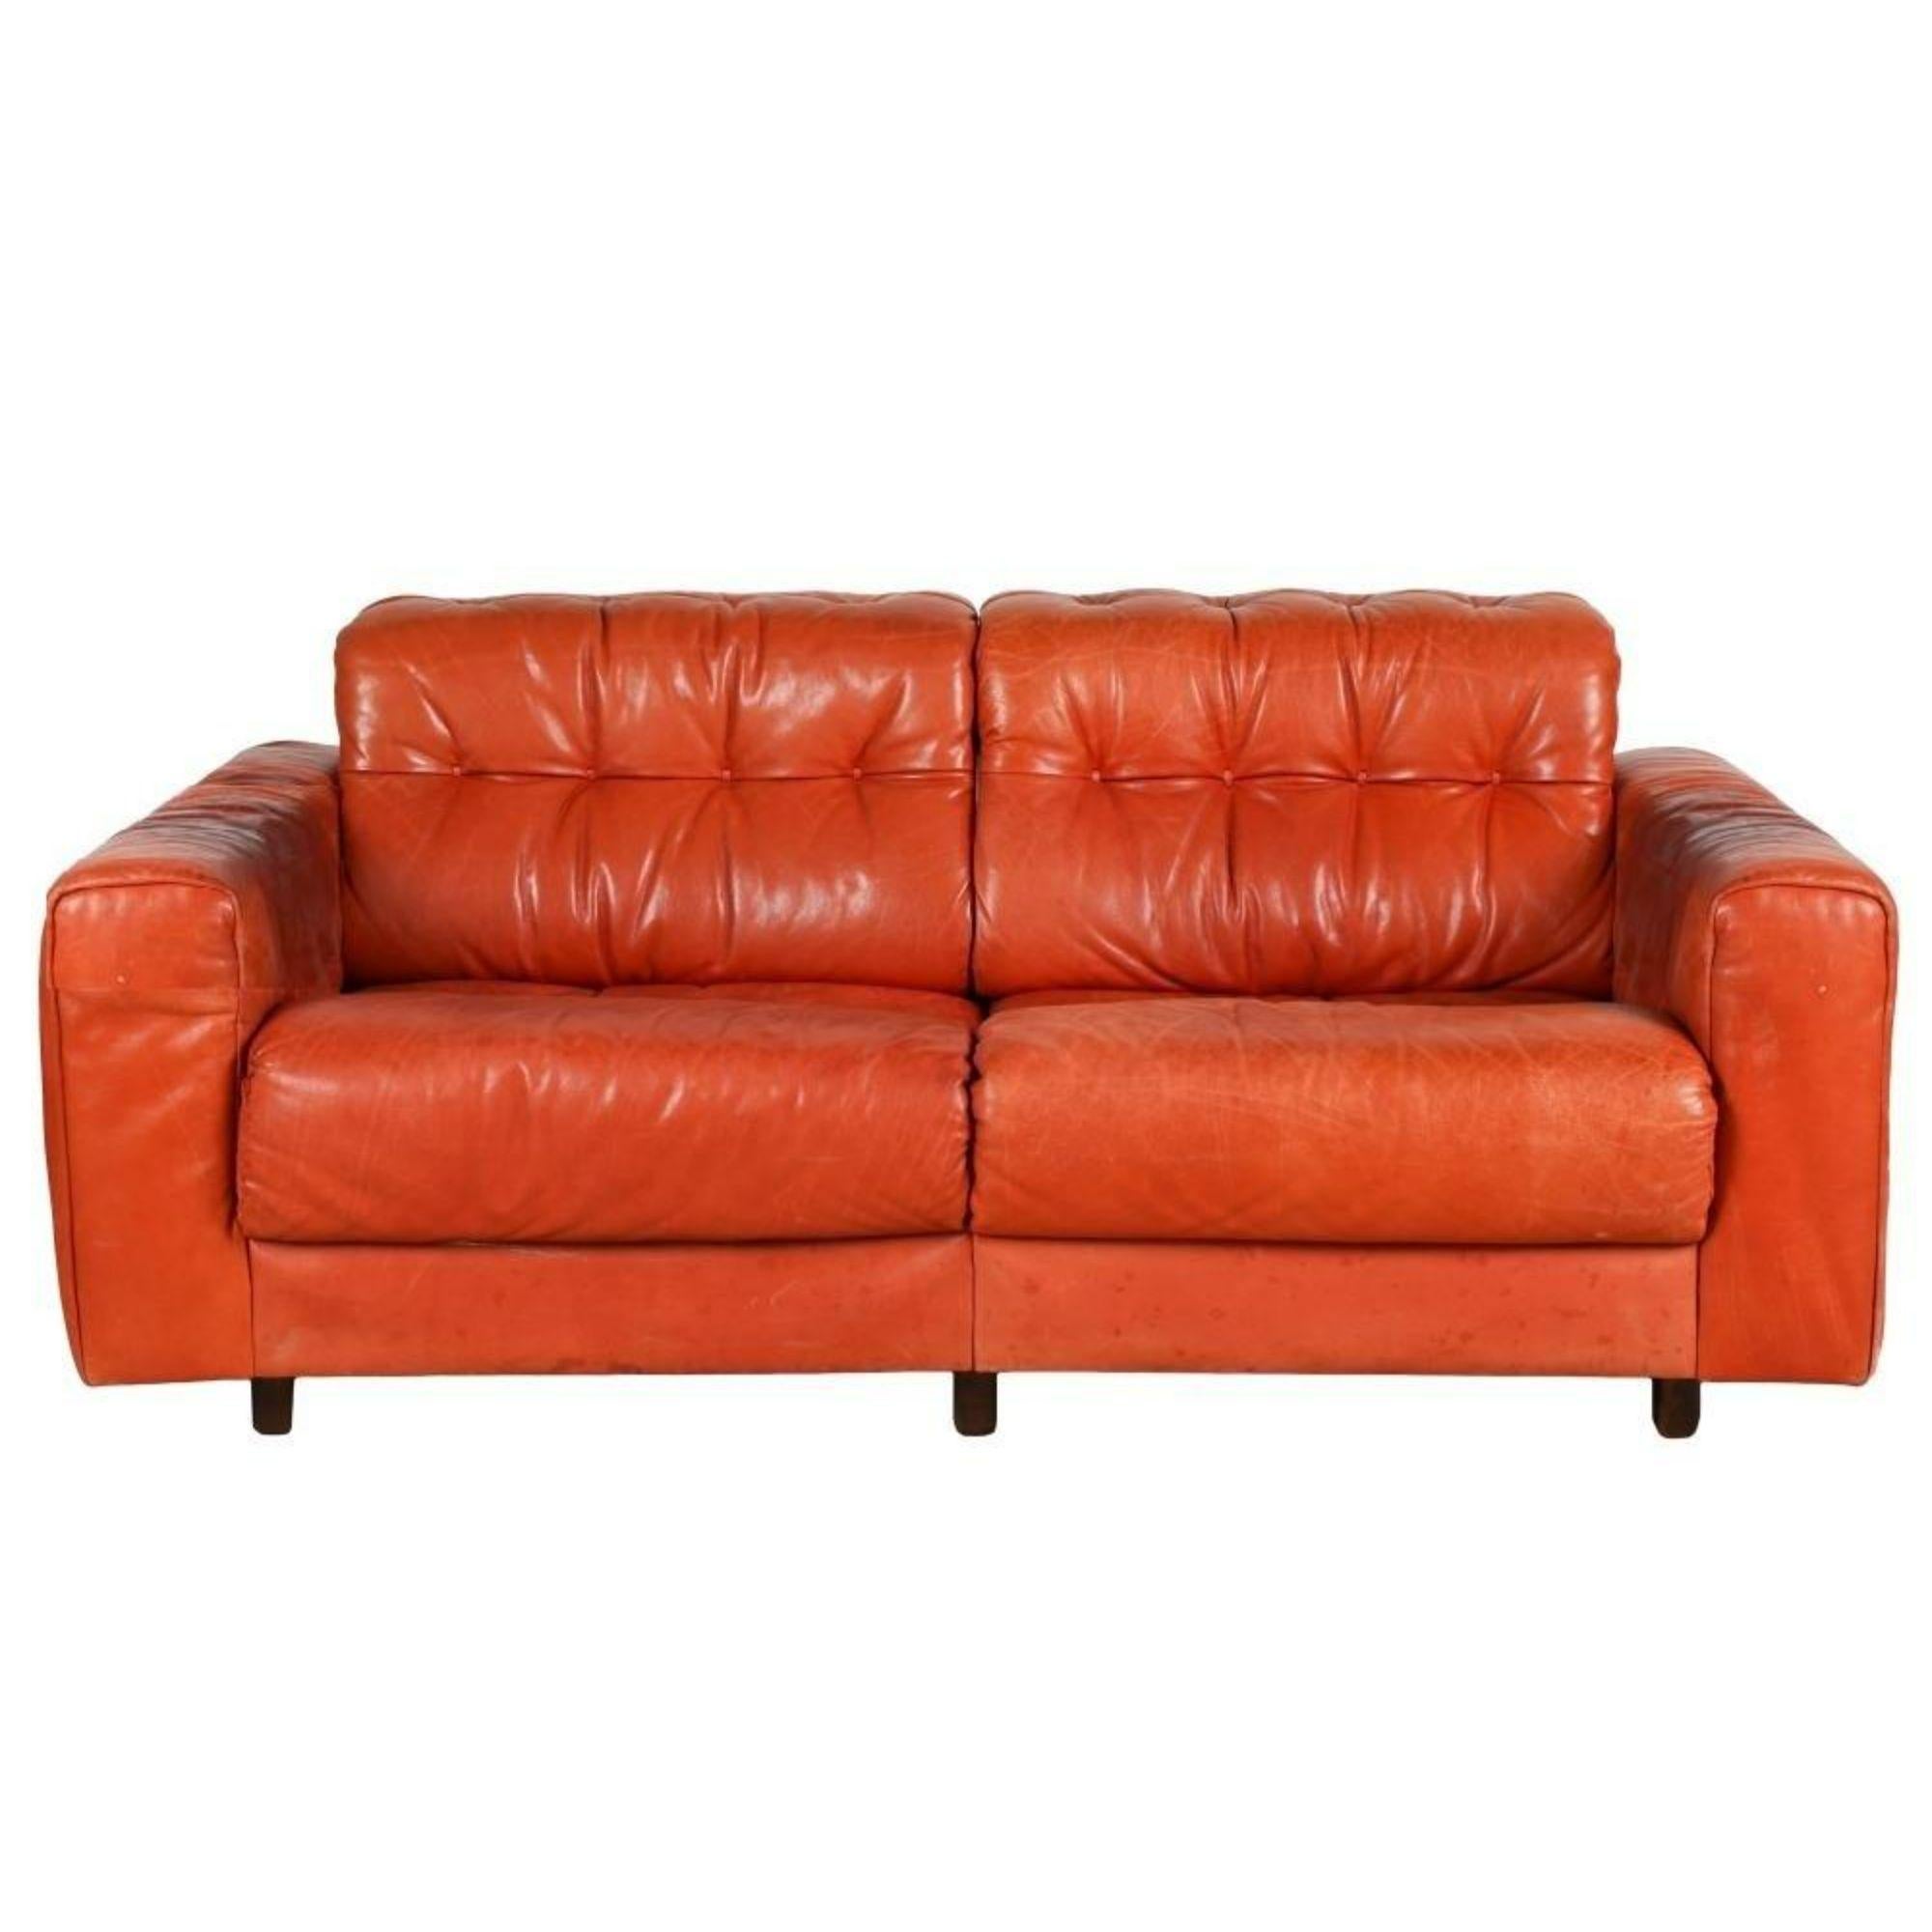 midcentury Modern De Sede Orange Leather Loveseat Sofa. It is as much a piece of modern art as it is seating. 

Additional information: 
Materials: Leather, Wood
Color: Orange
Brand: De Sede
Designer: De Sede
Period: Mid 20th Century